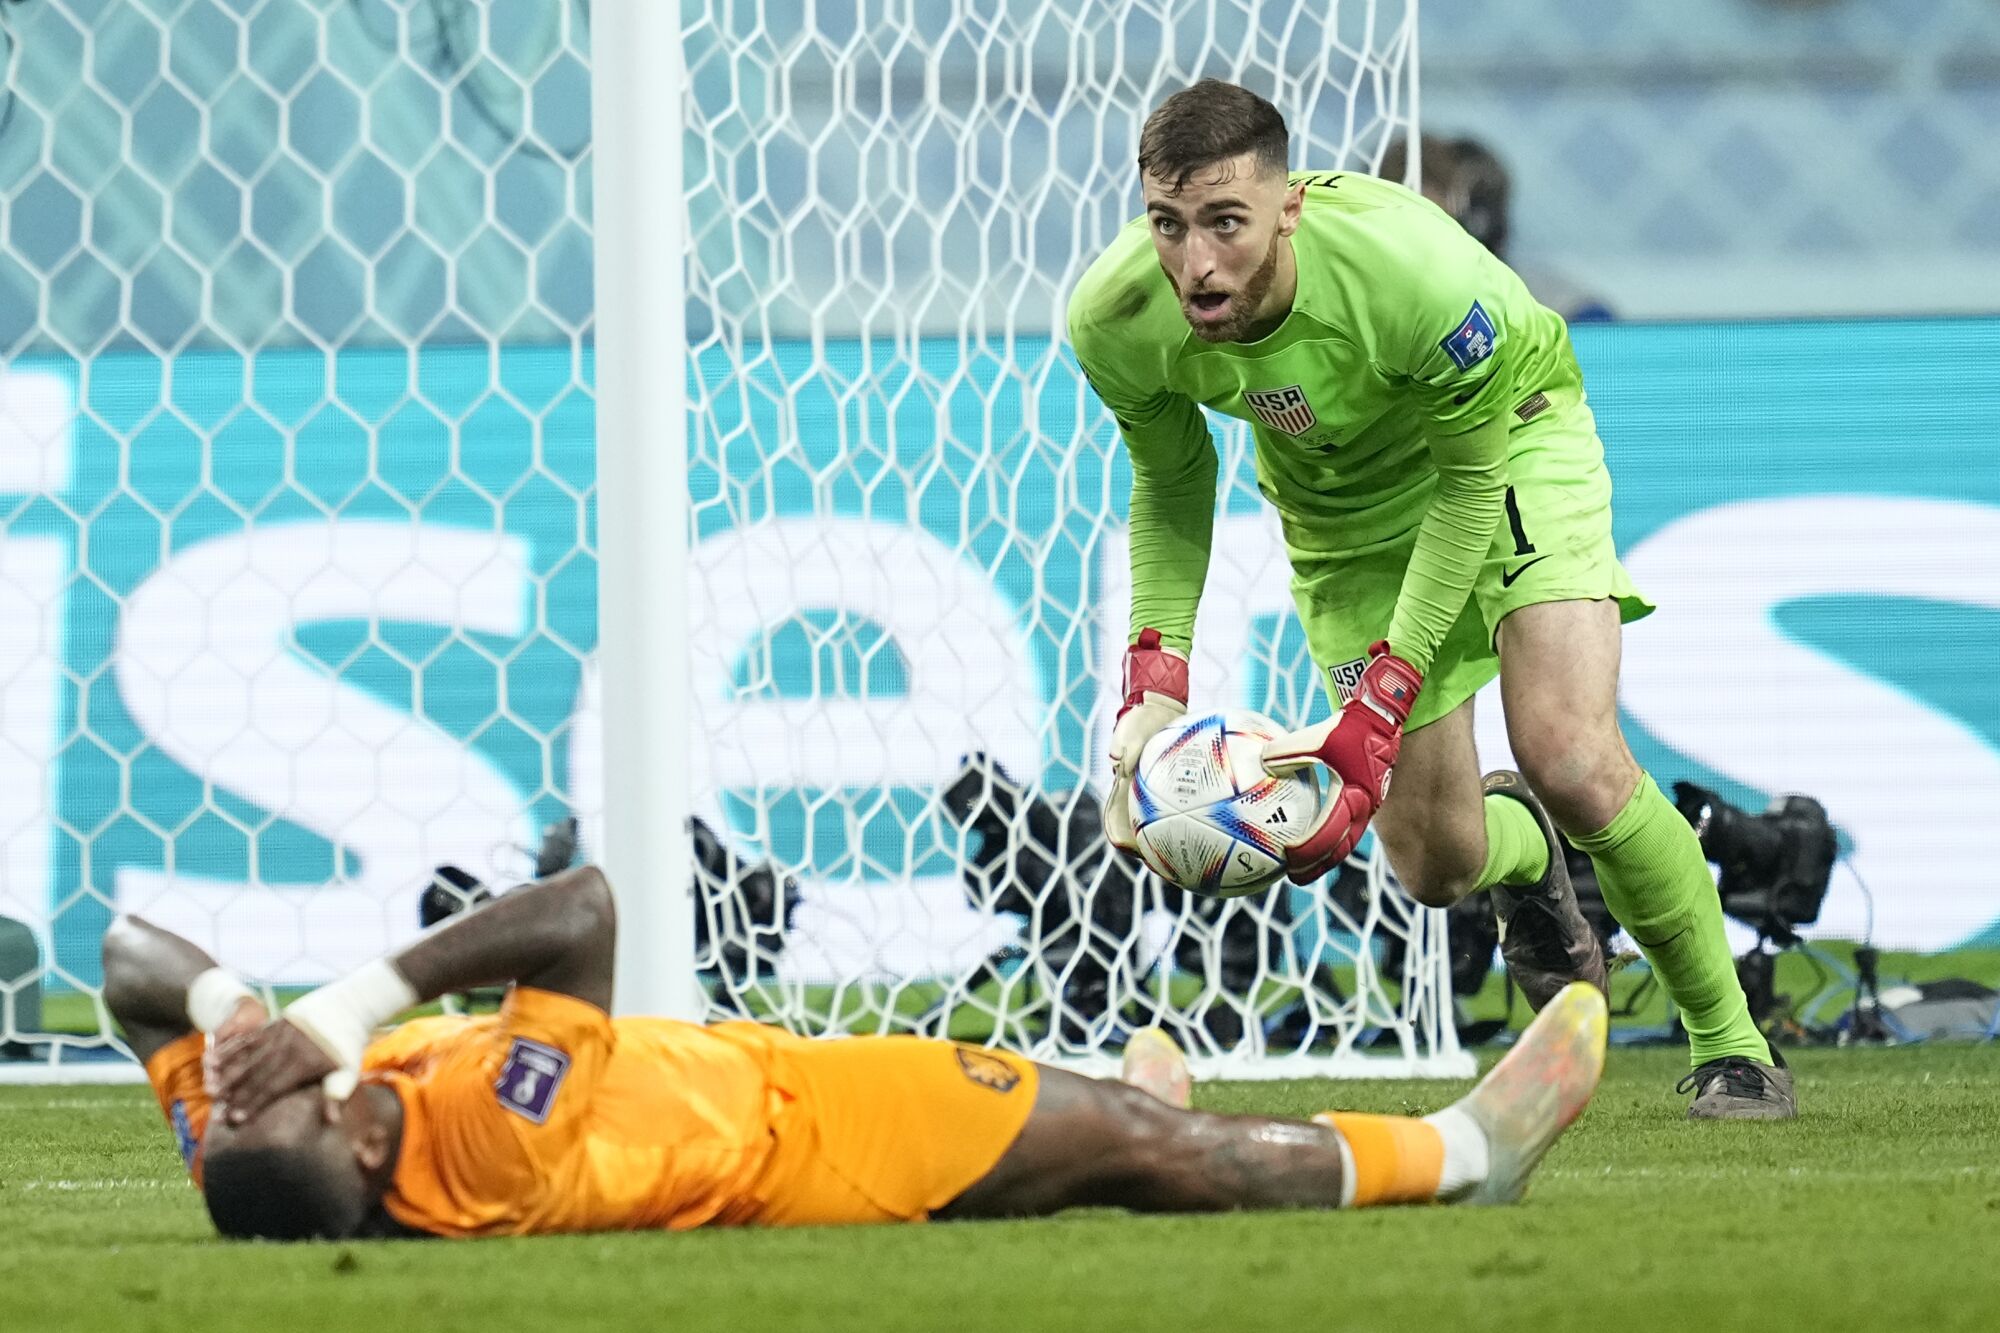 U.S. goalkeeper Matt Turner collects the ball as the Netherland's Steven Bergwijn covers his face after failing to score 